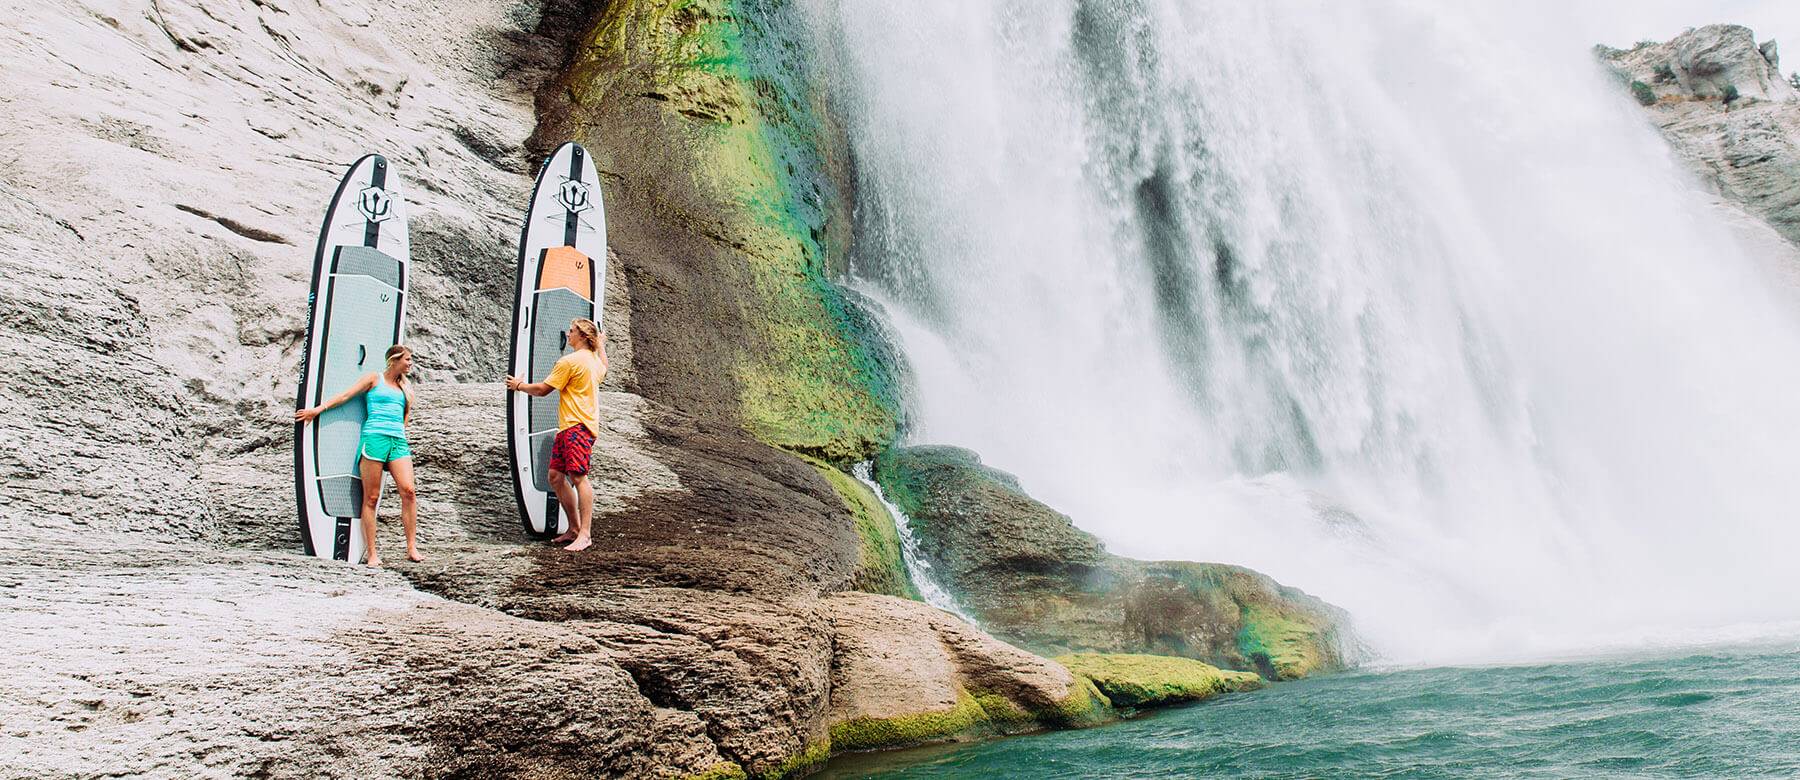 Two people stand with their paddle boards beside Shoshone Falls